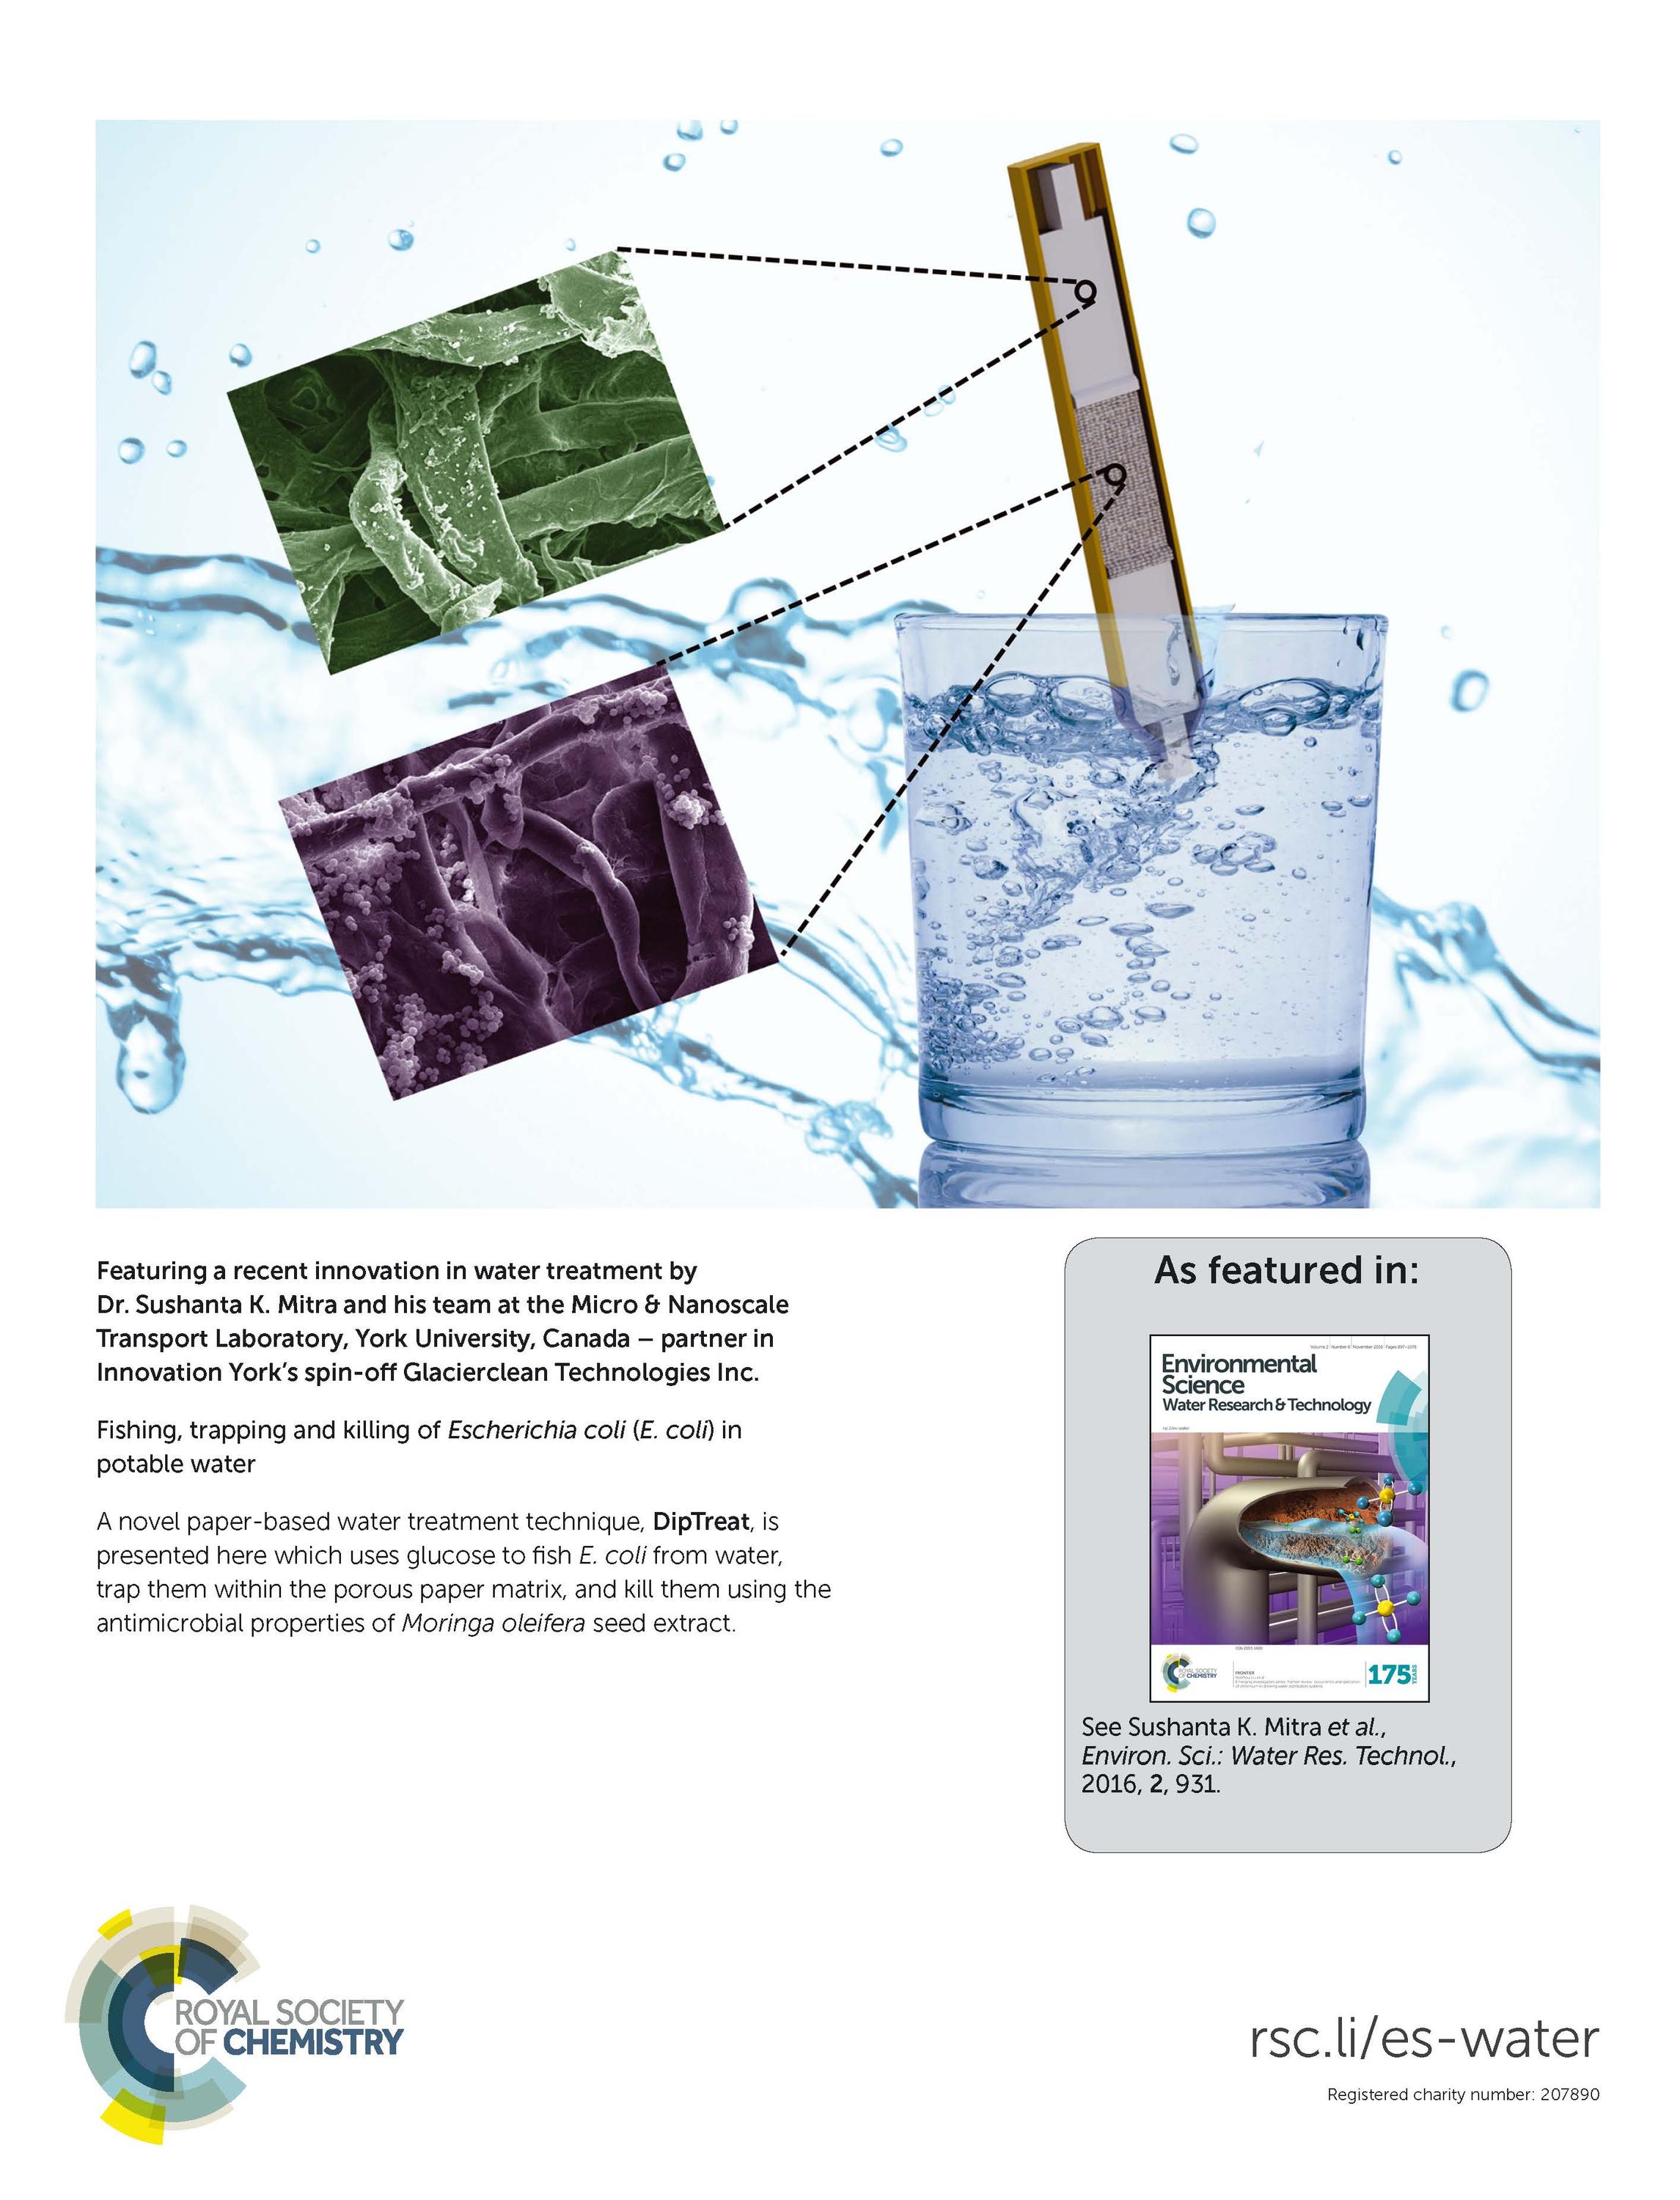  Water Research & Technology cover.